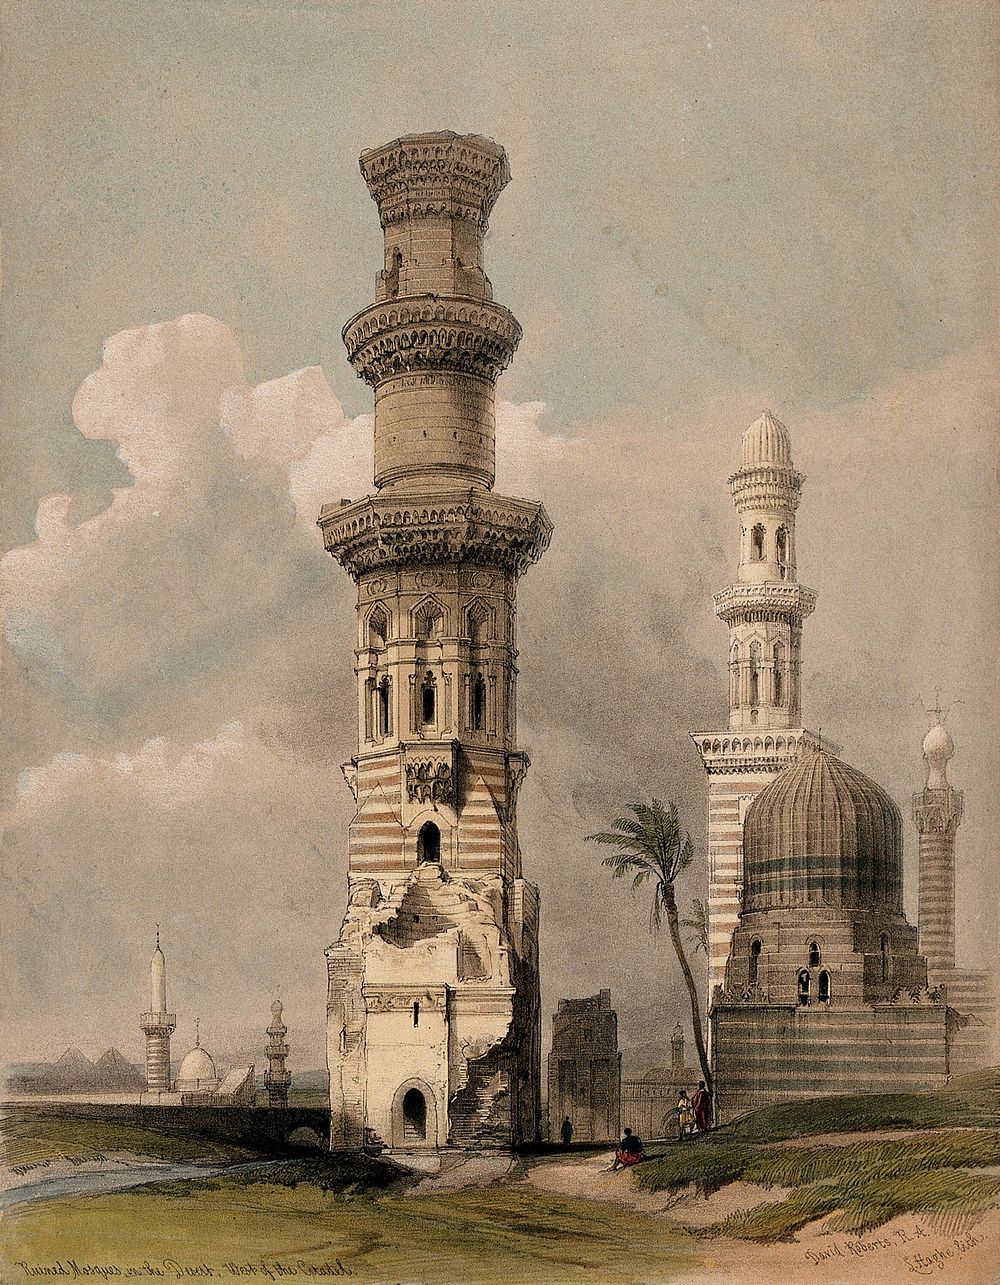 Ruined mosques to the west of Cairo, Egypt. Coloured lithograph by Louis Haghe after David Roberts, 1848.